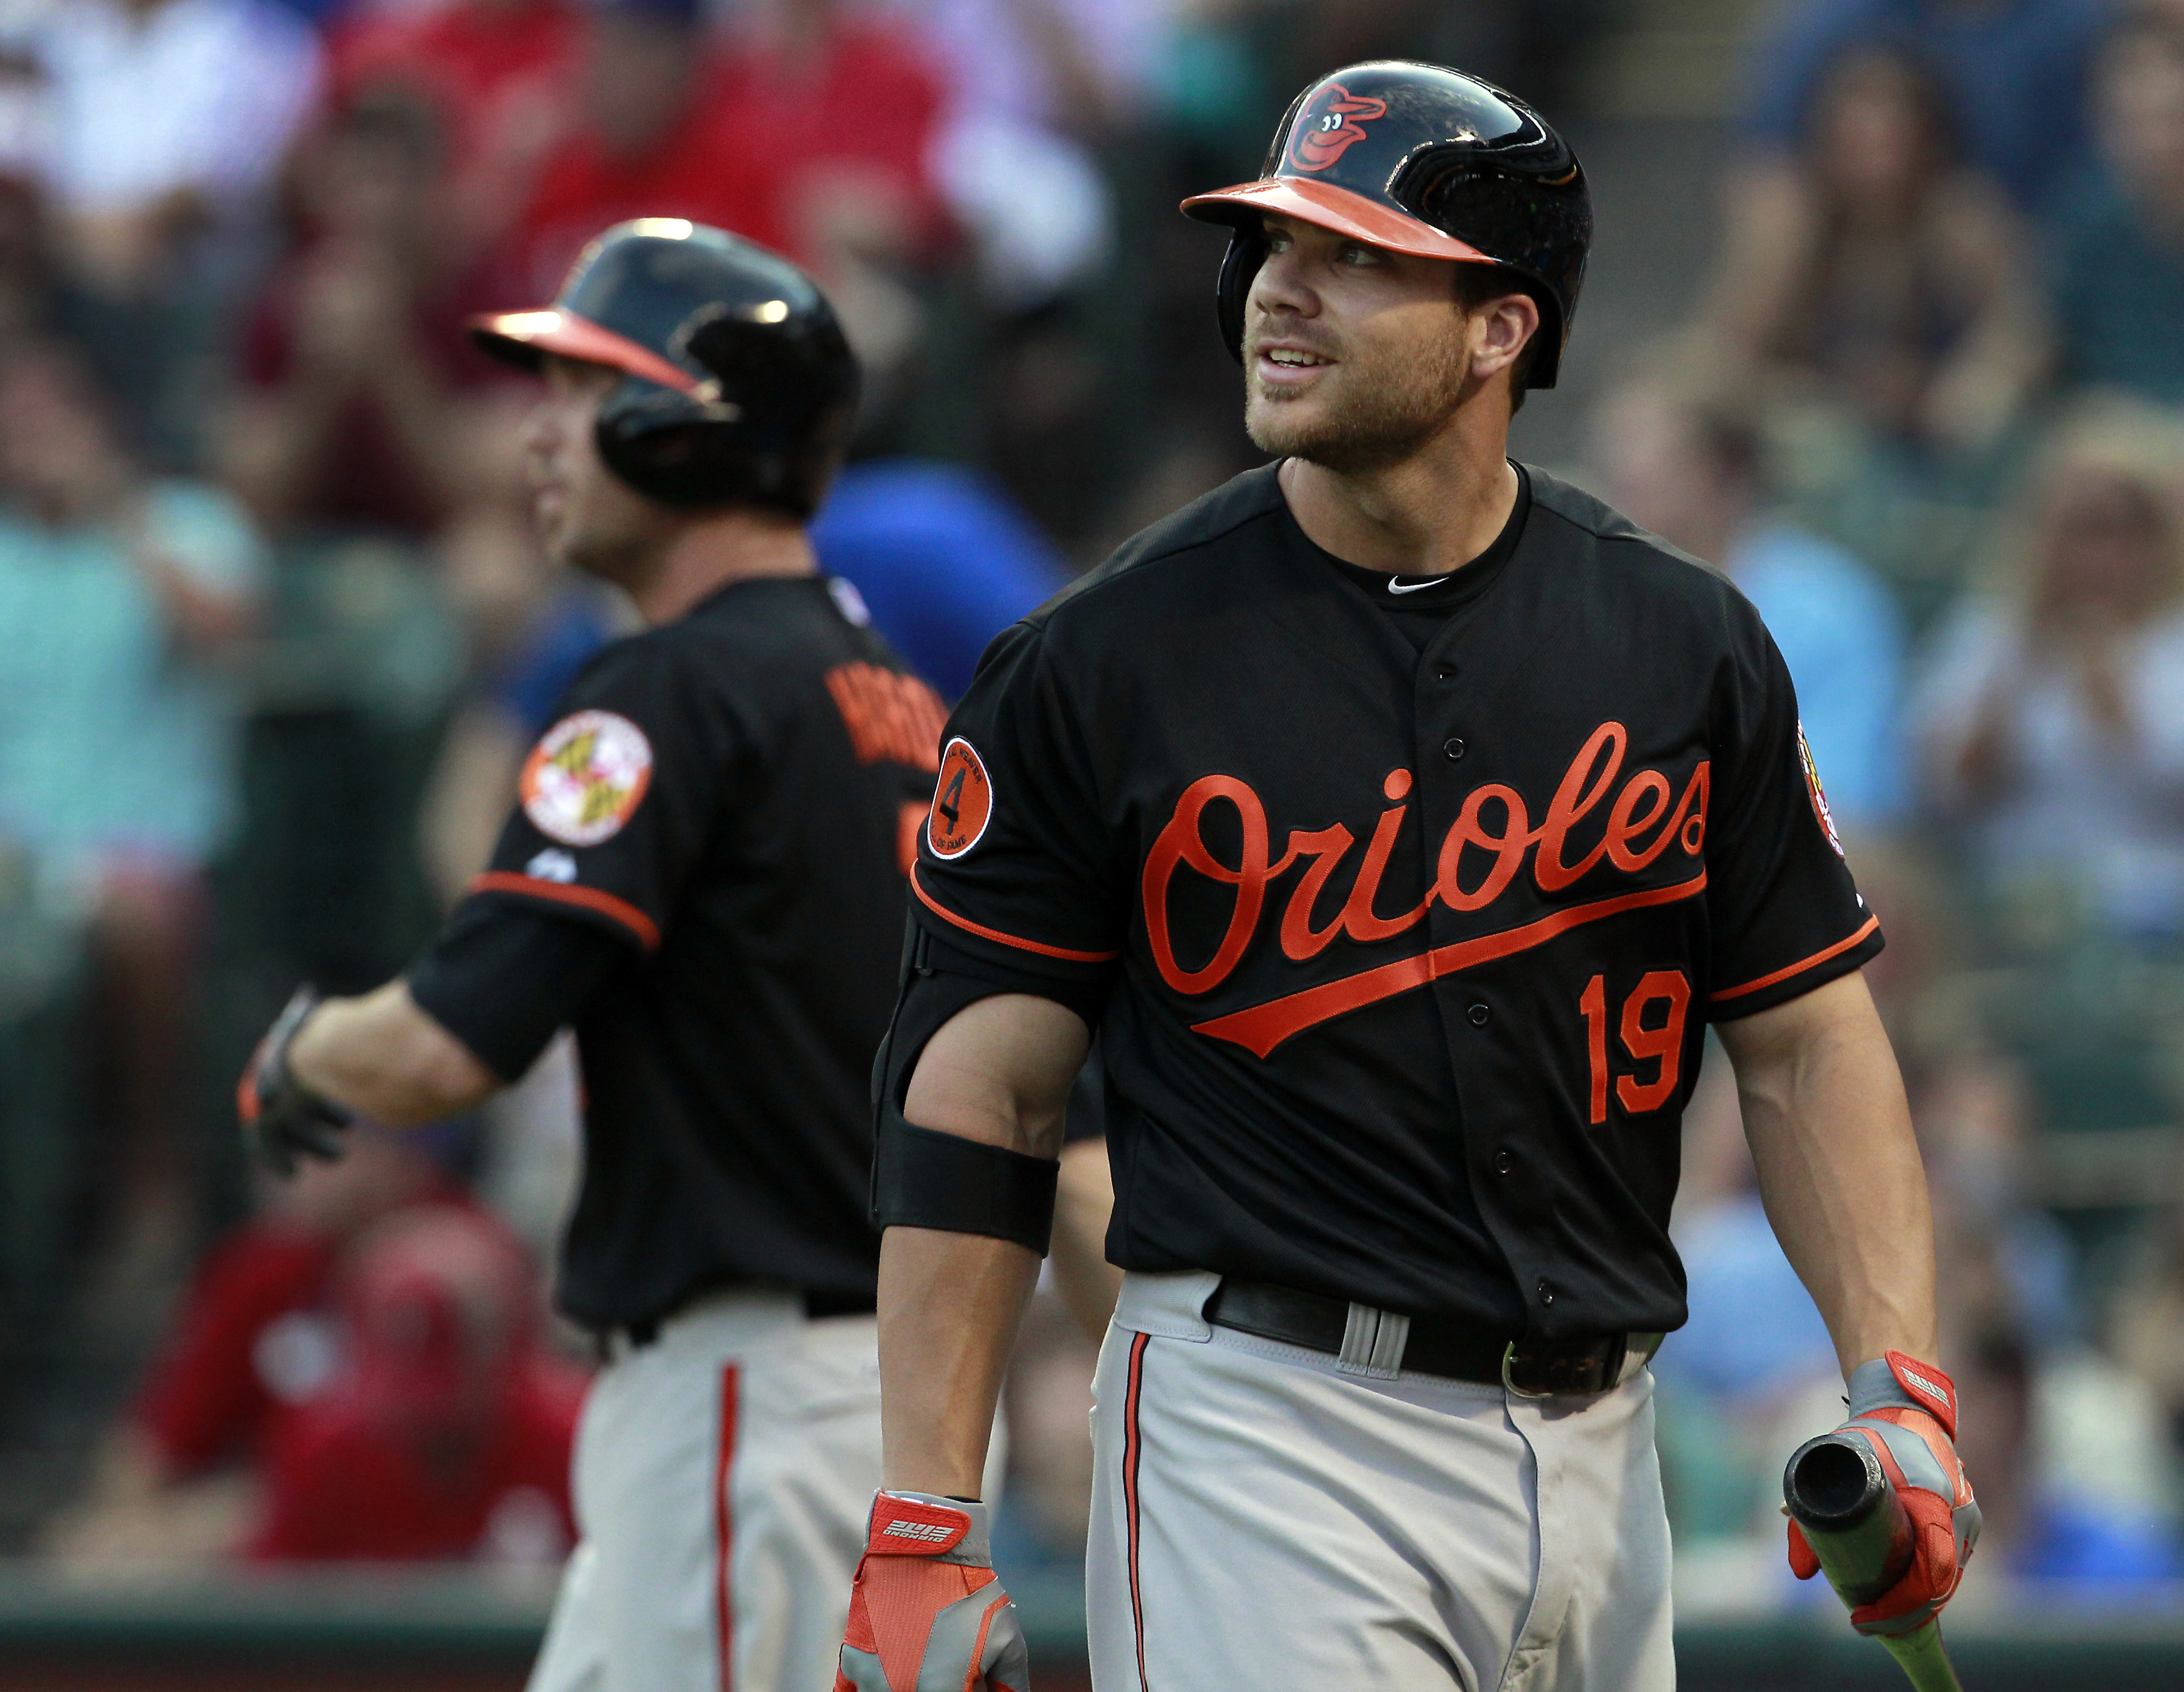 Friday Newsletter time: Ex-Ranger Chris Davis retires with most ignoring  the success he had